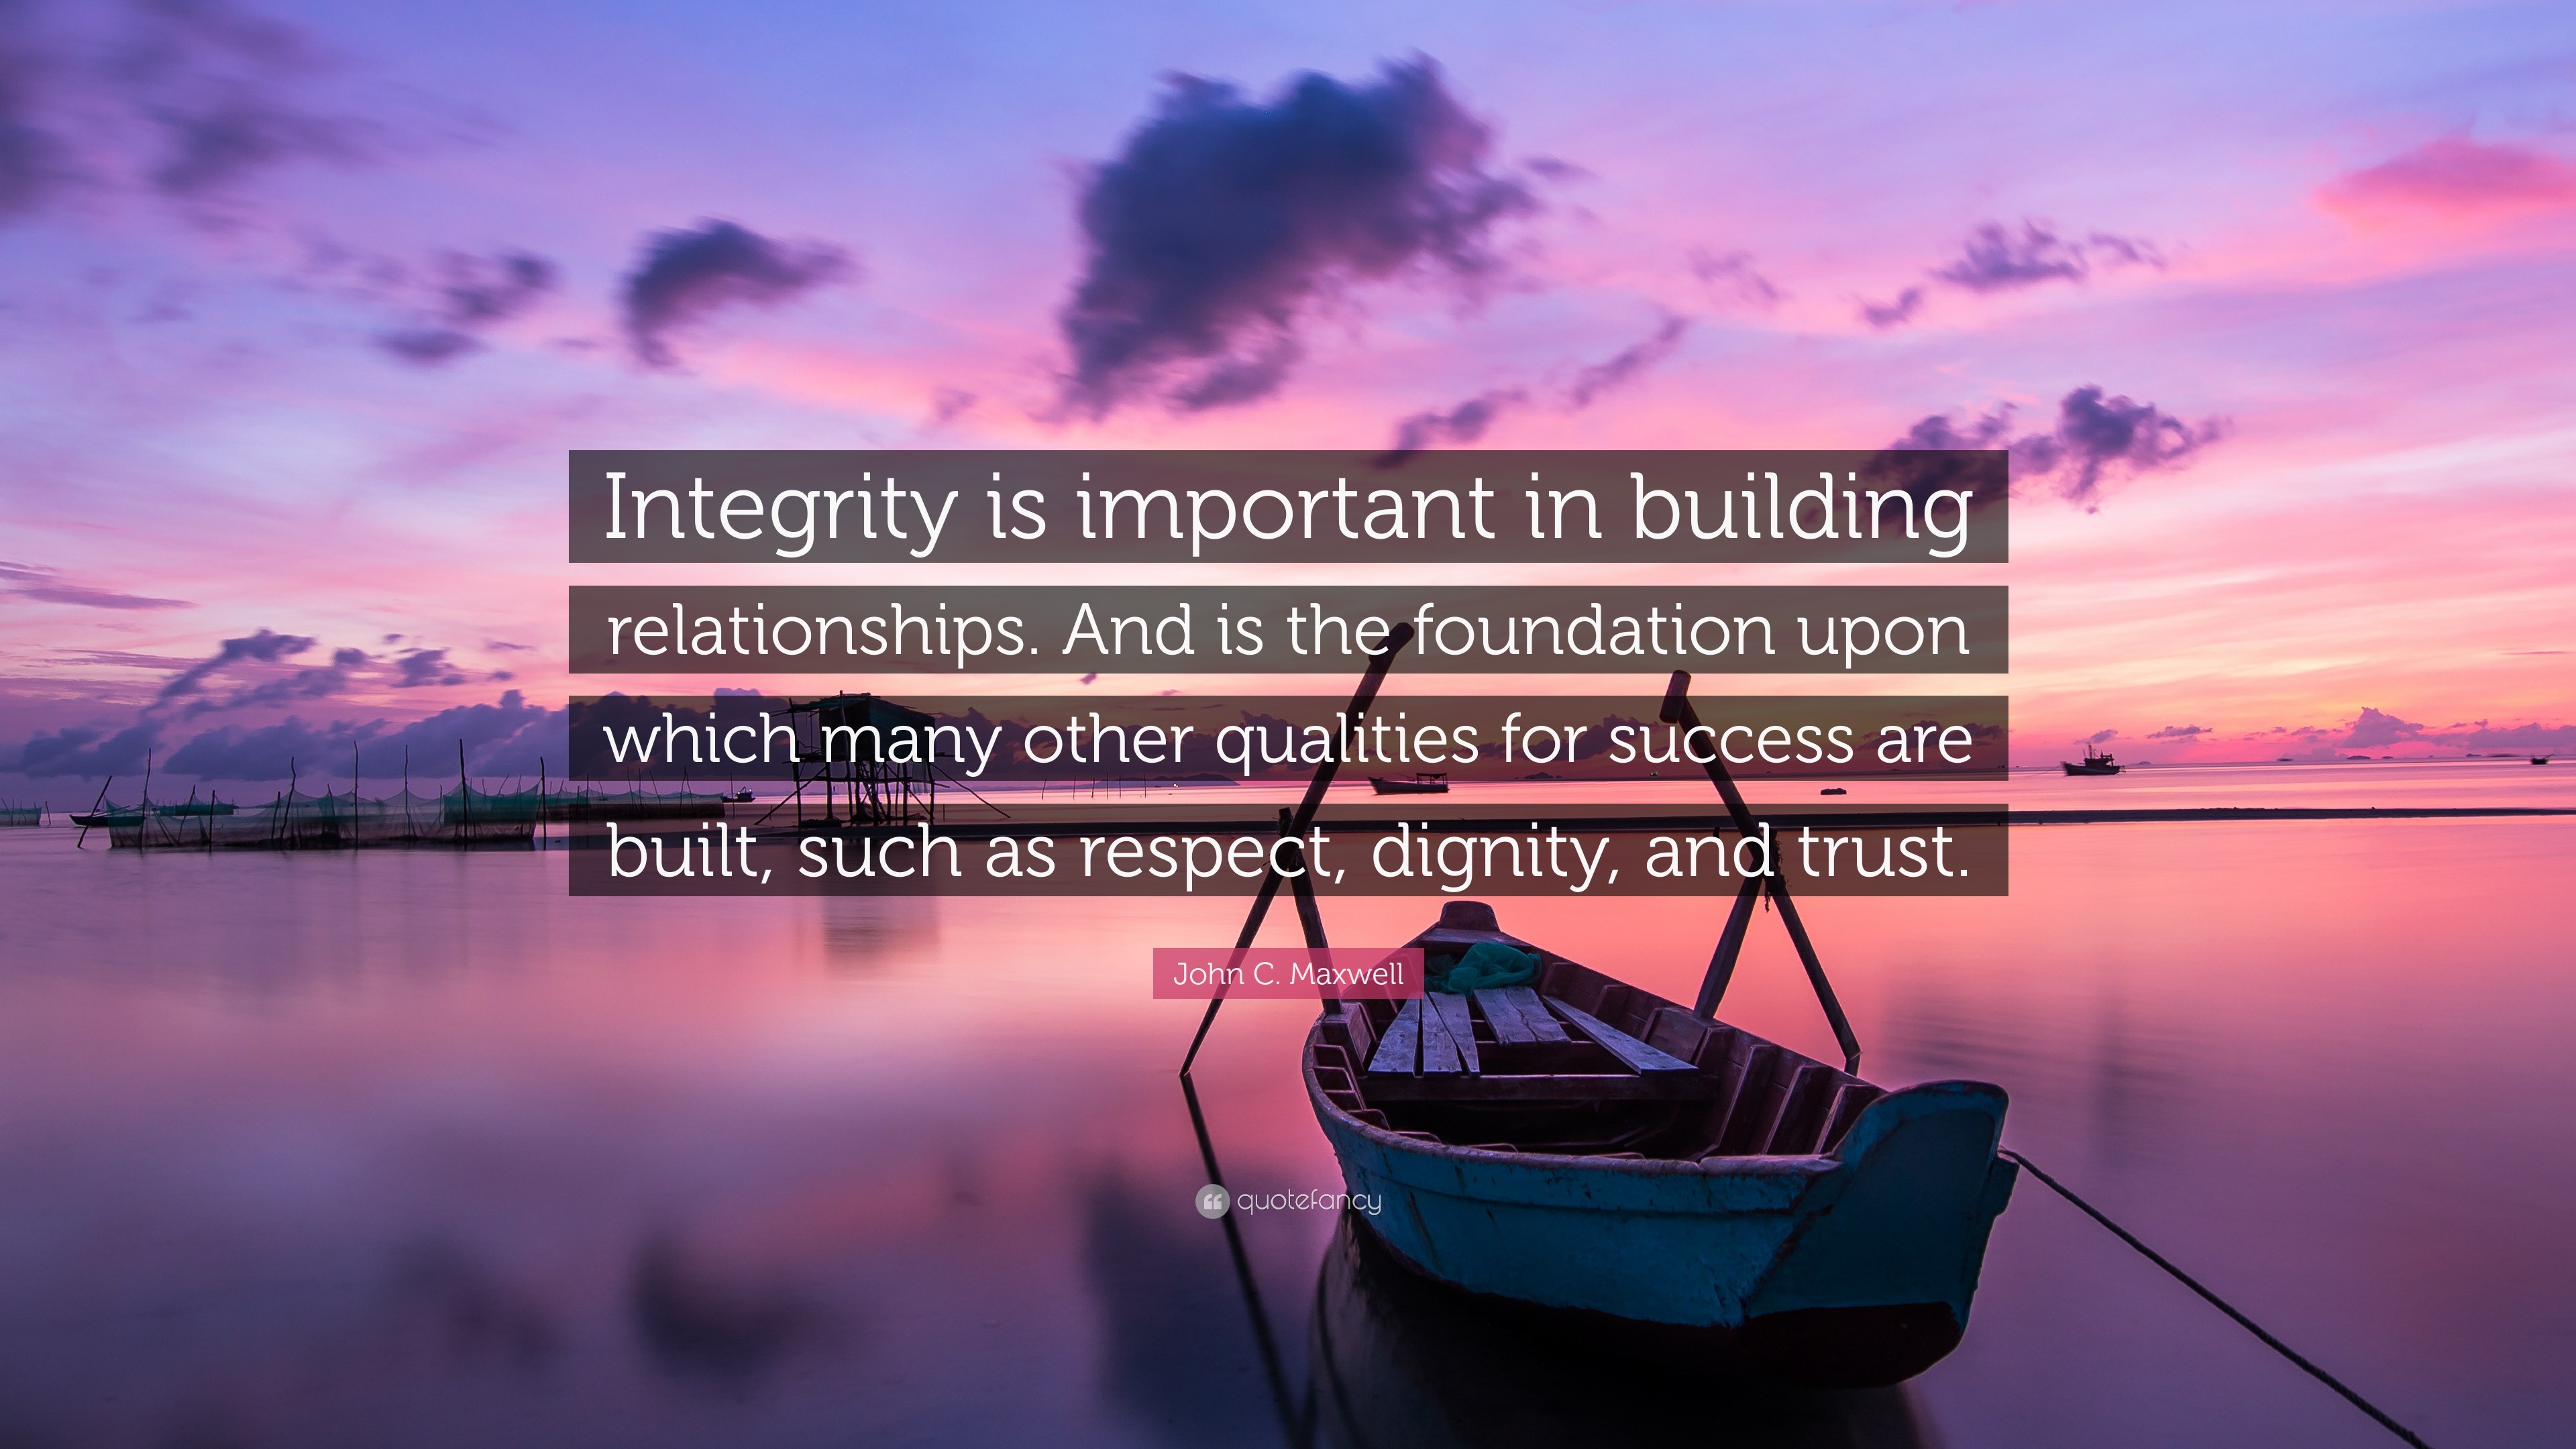 John C. Maxwell Quote: “Integrity is important in building